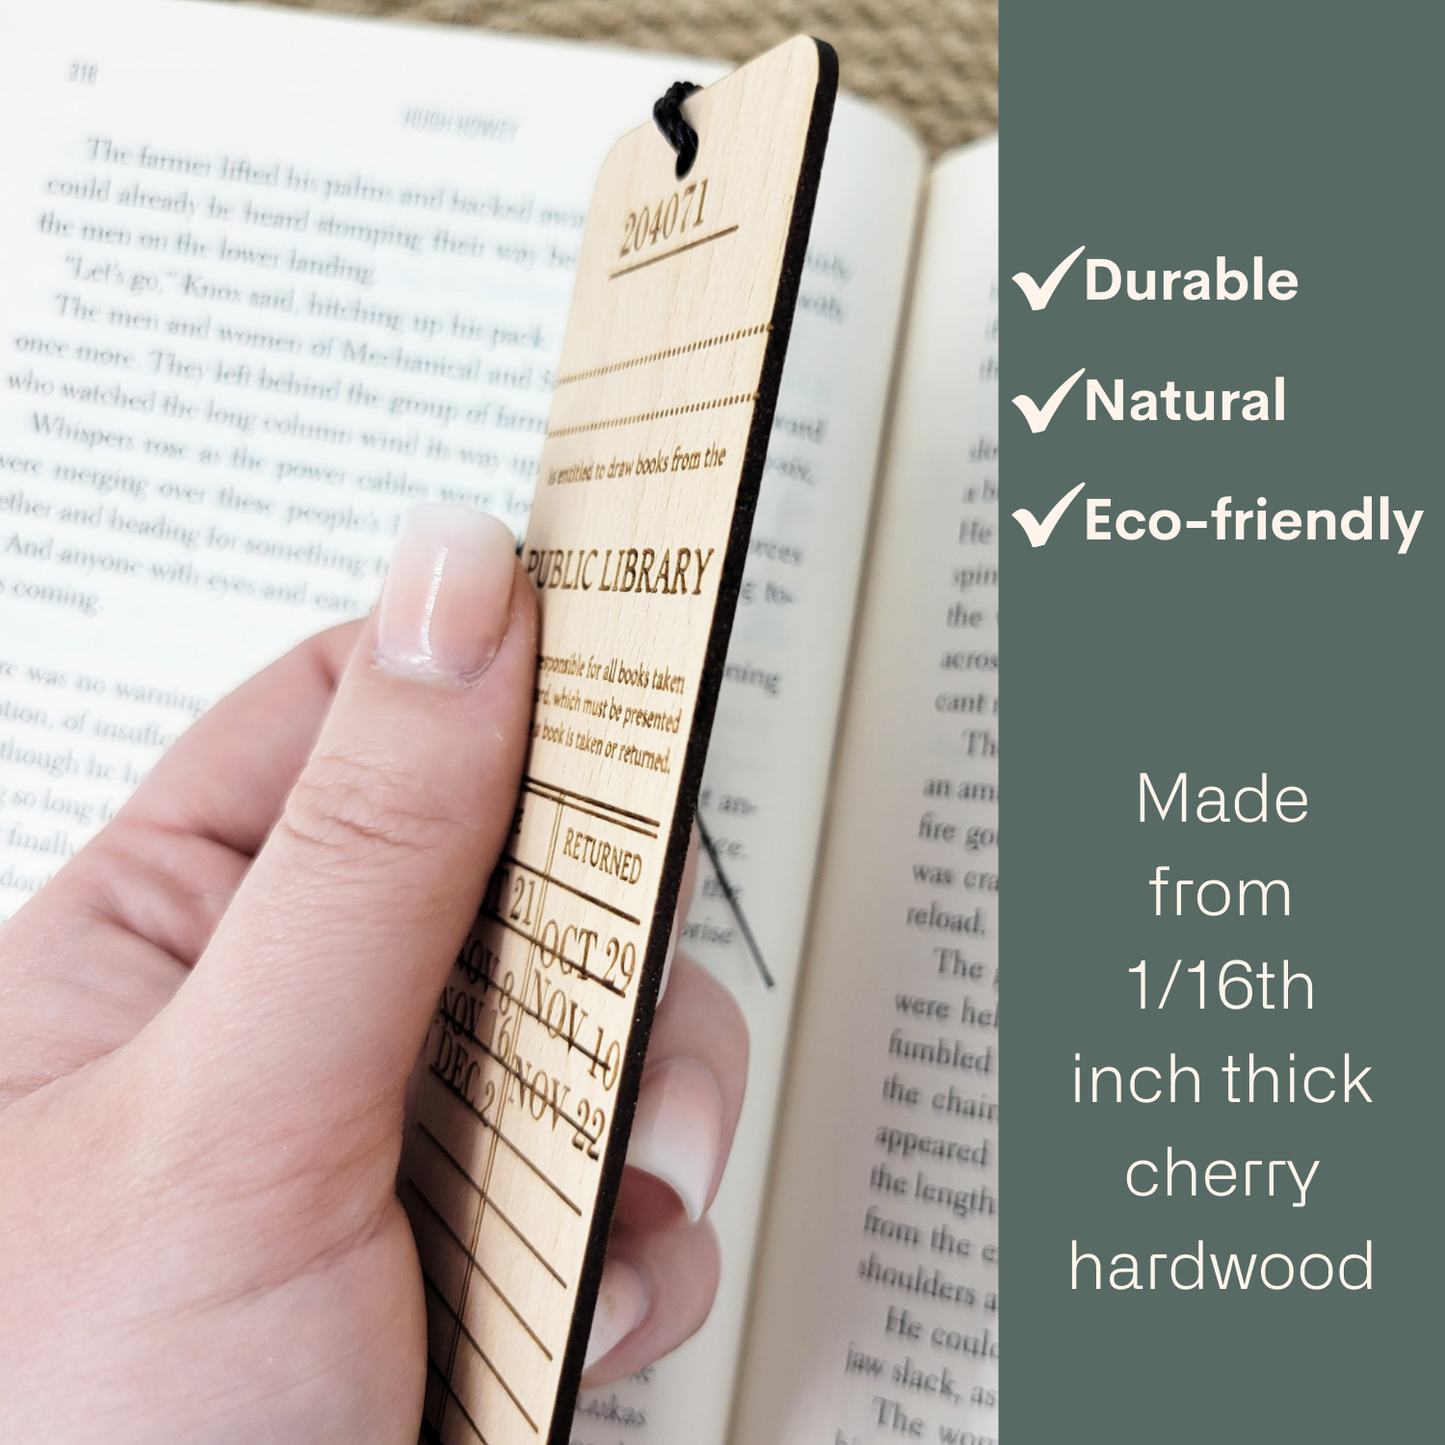 Bumble and Birch - One More Chapter wood bookmark